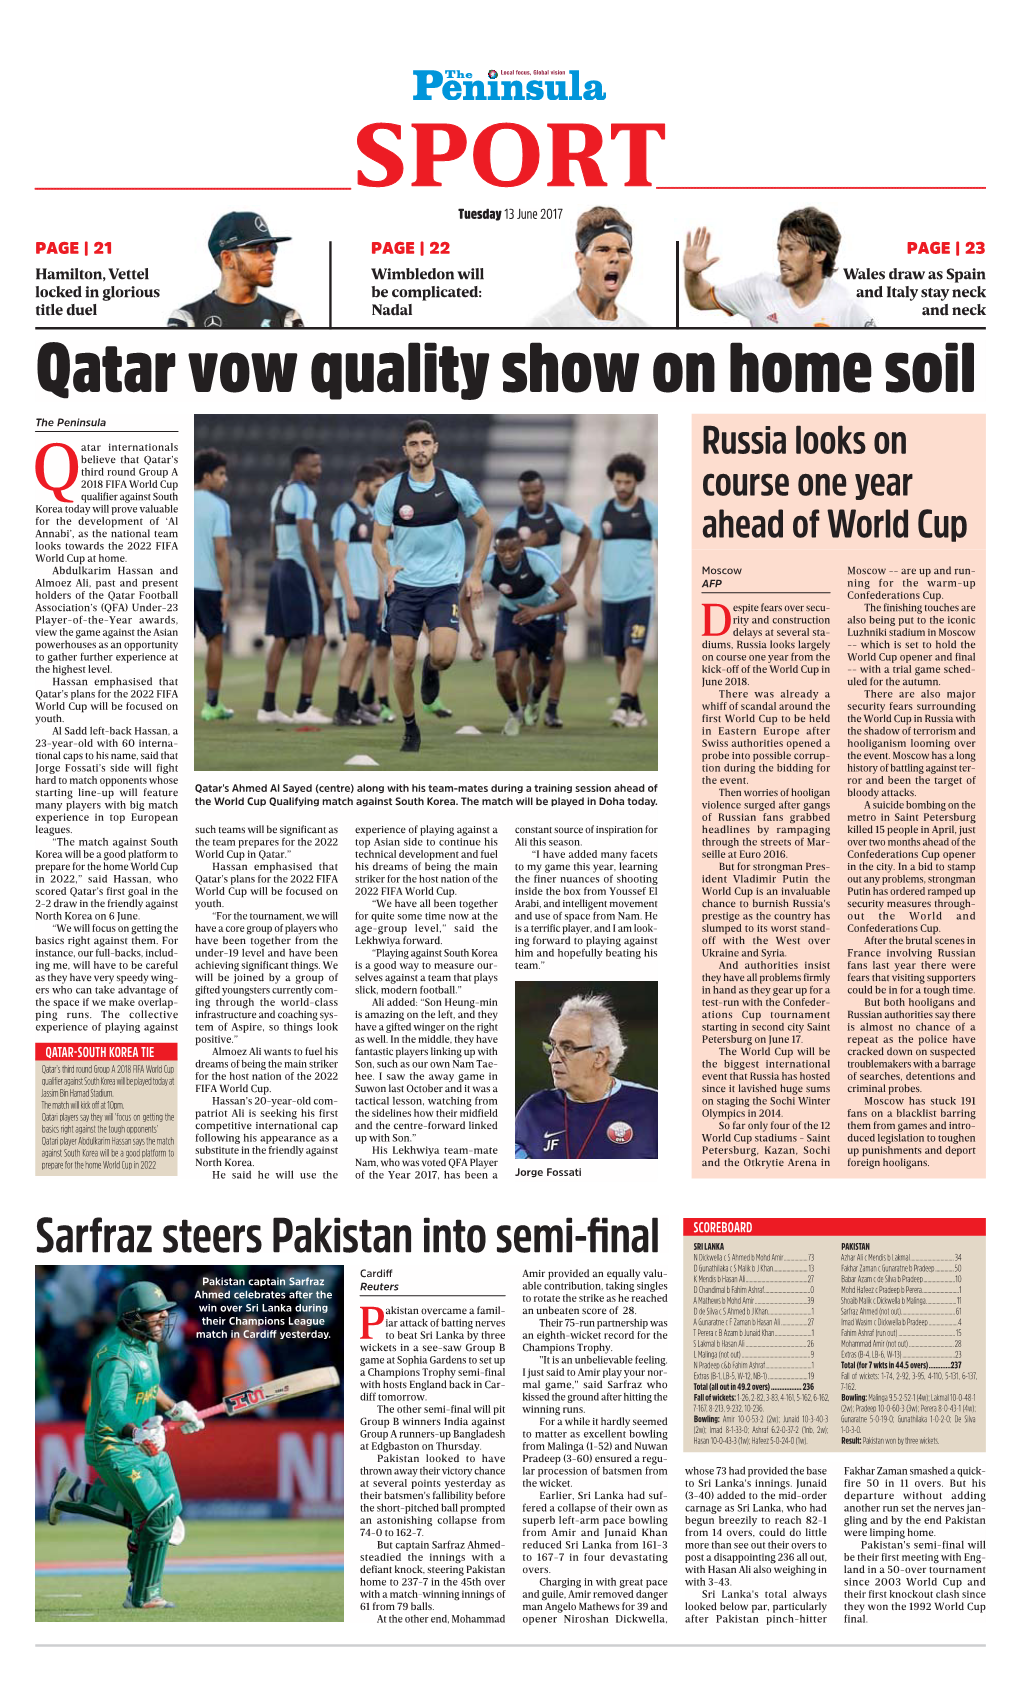 Nadal and Neck Qatar Vow Quality Show on Home Soil